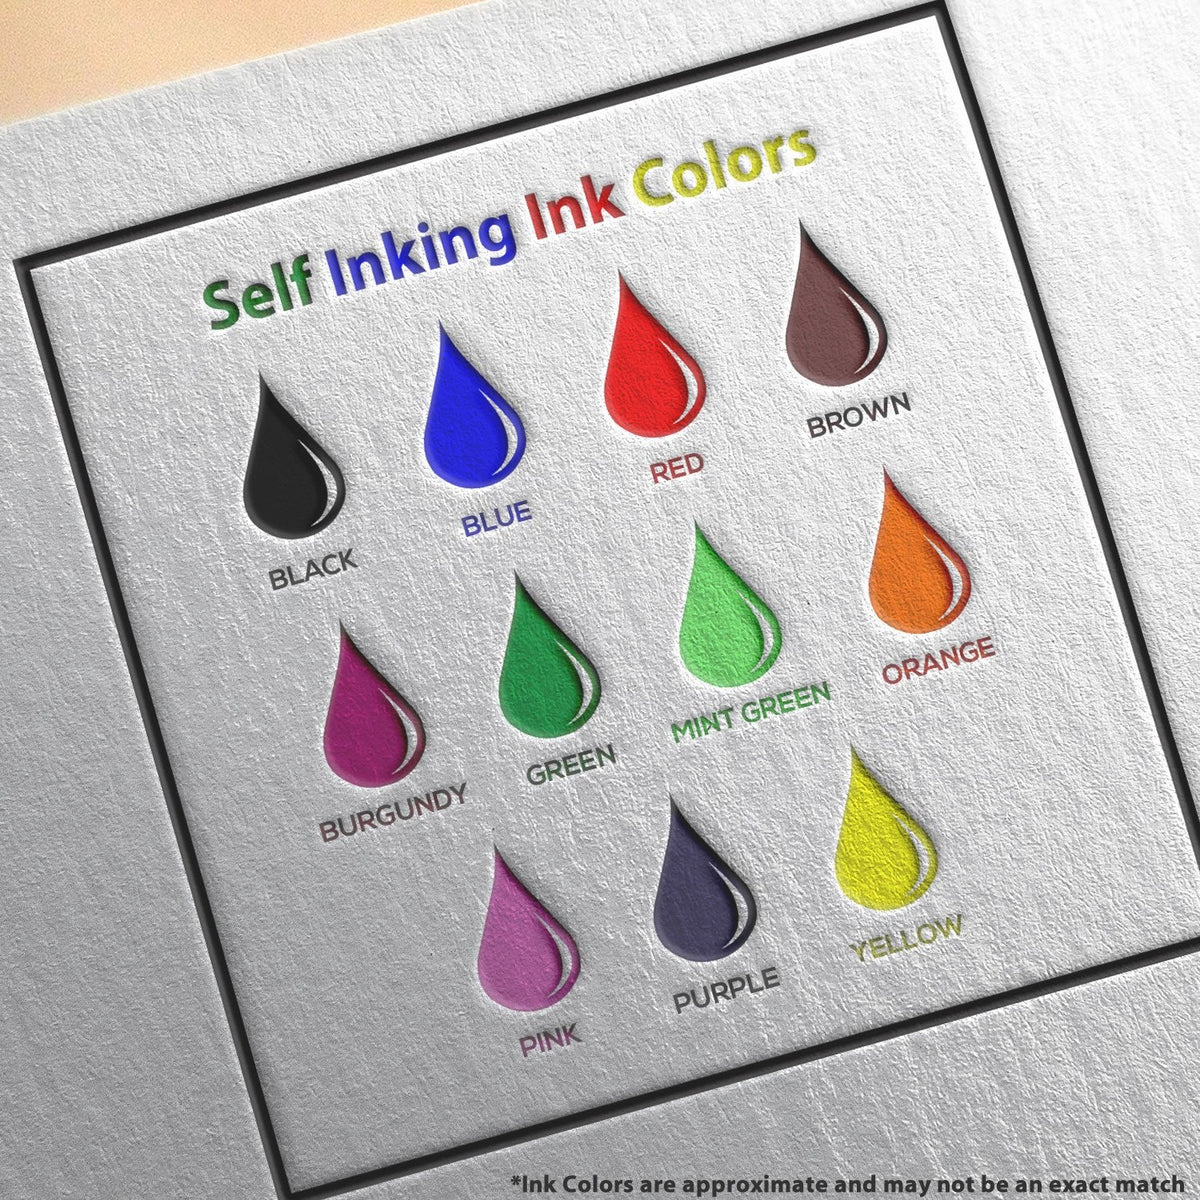 Self-Inking Parcel Post Economy Stamp Ink Color Options